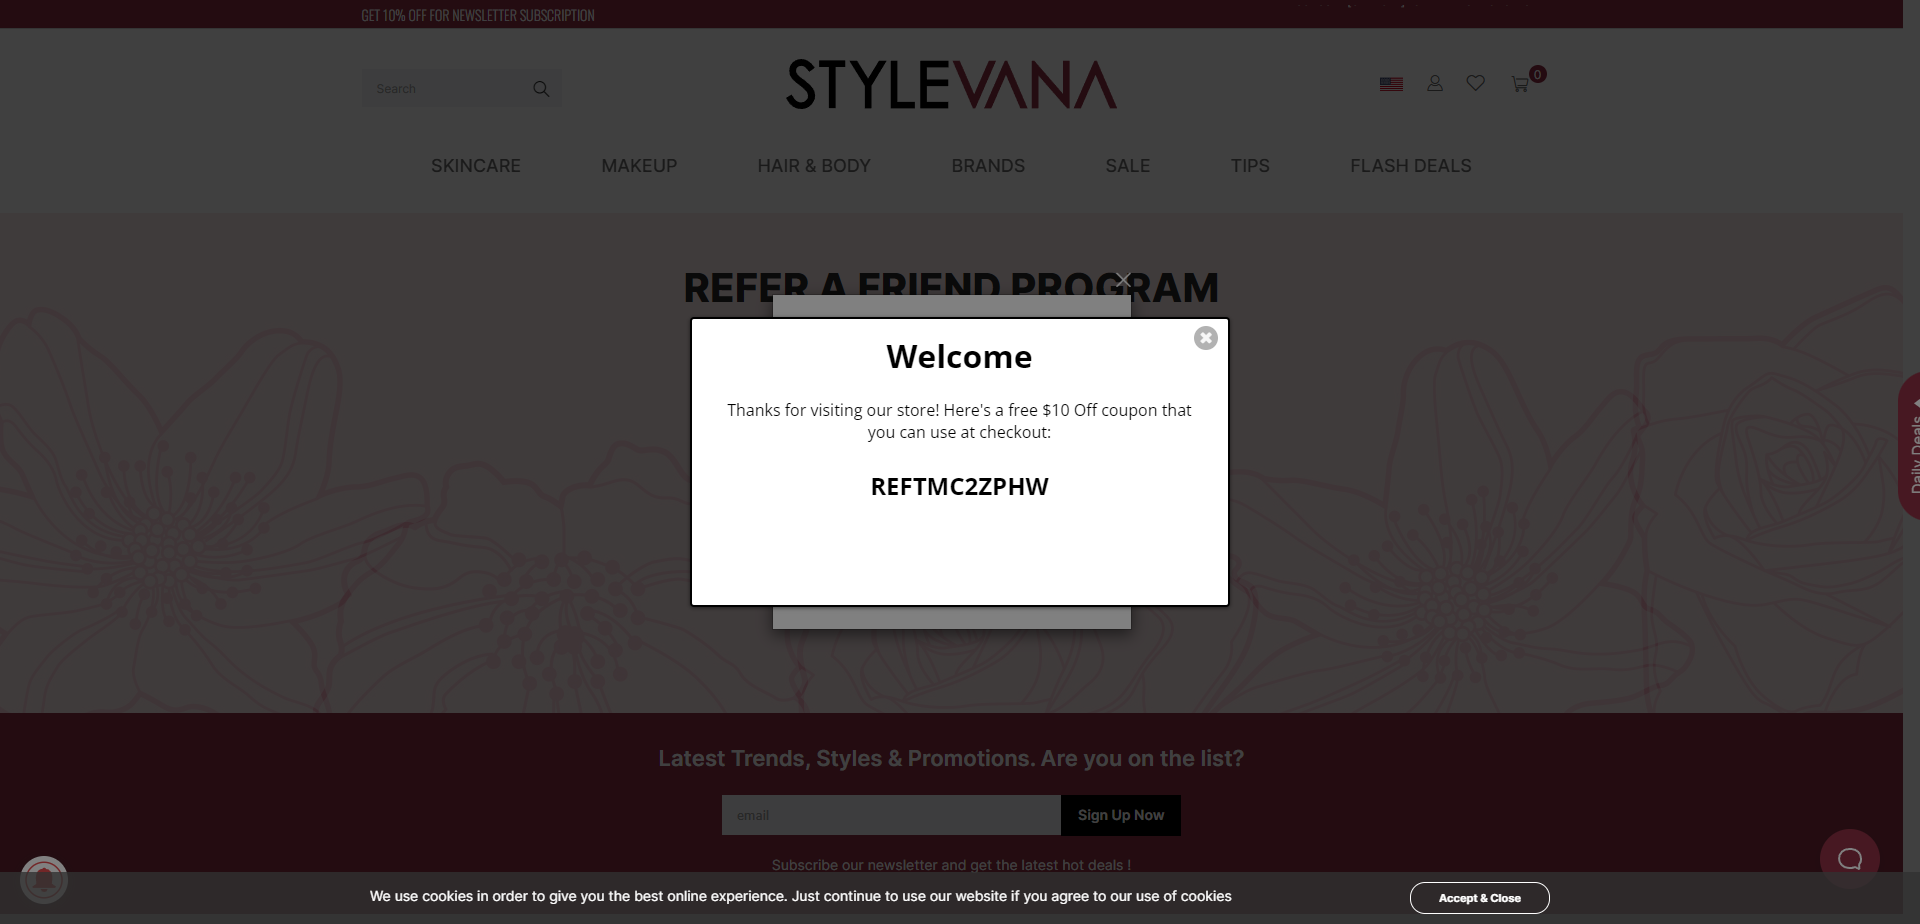 Landing Page for Stylevana